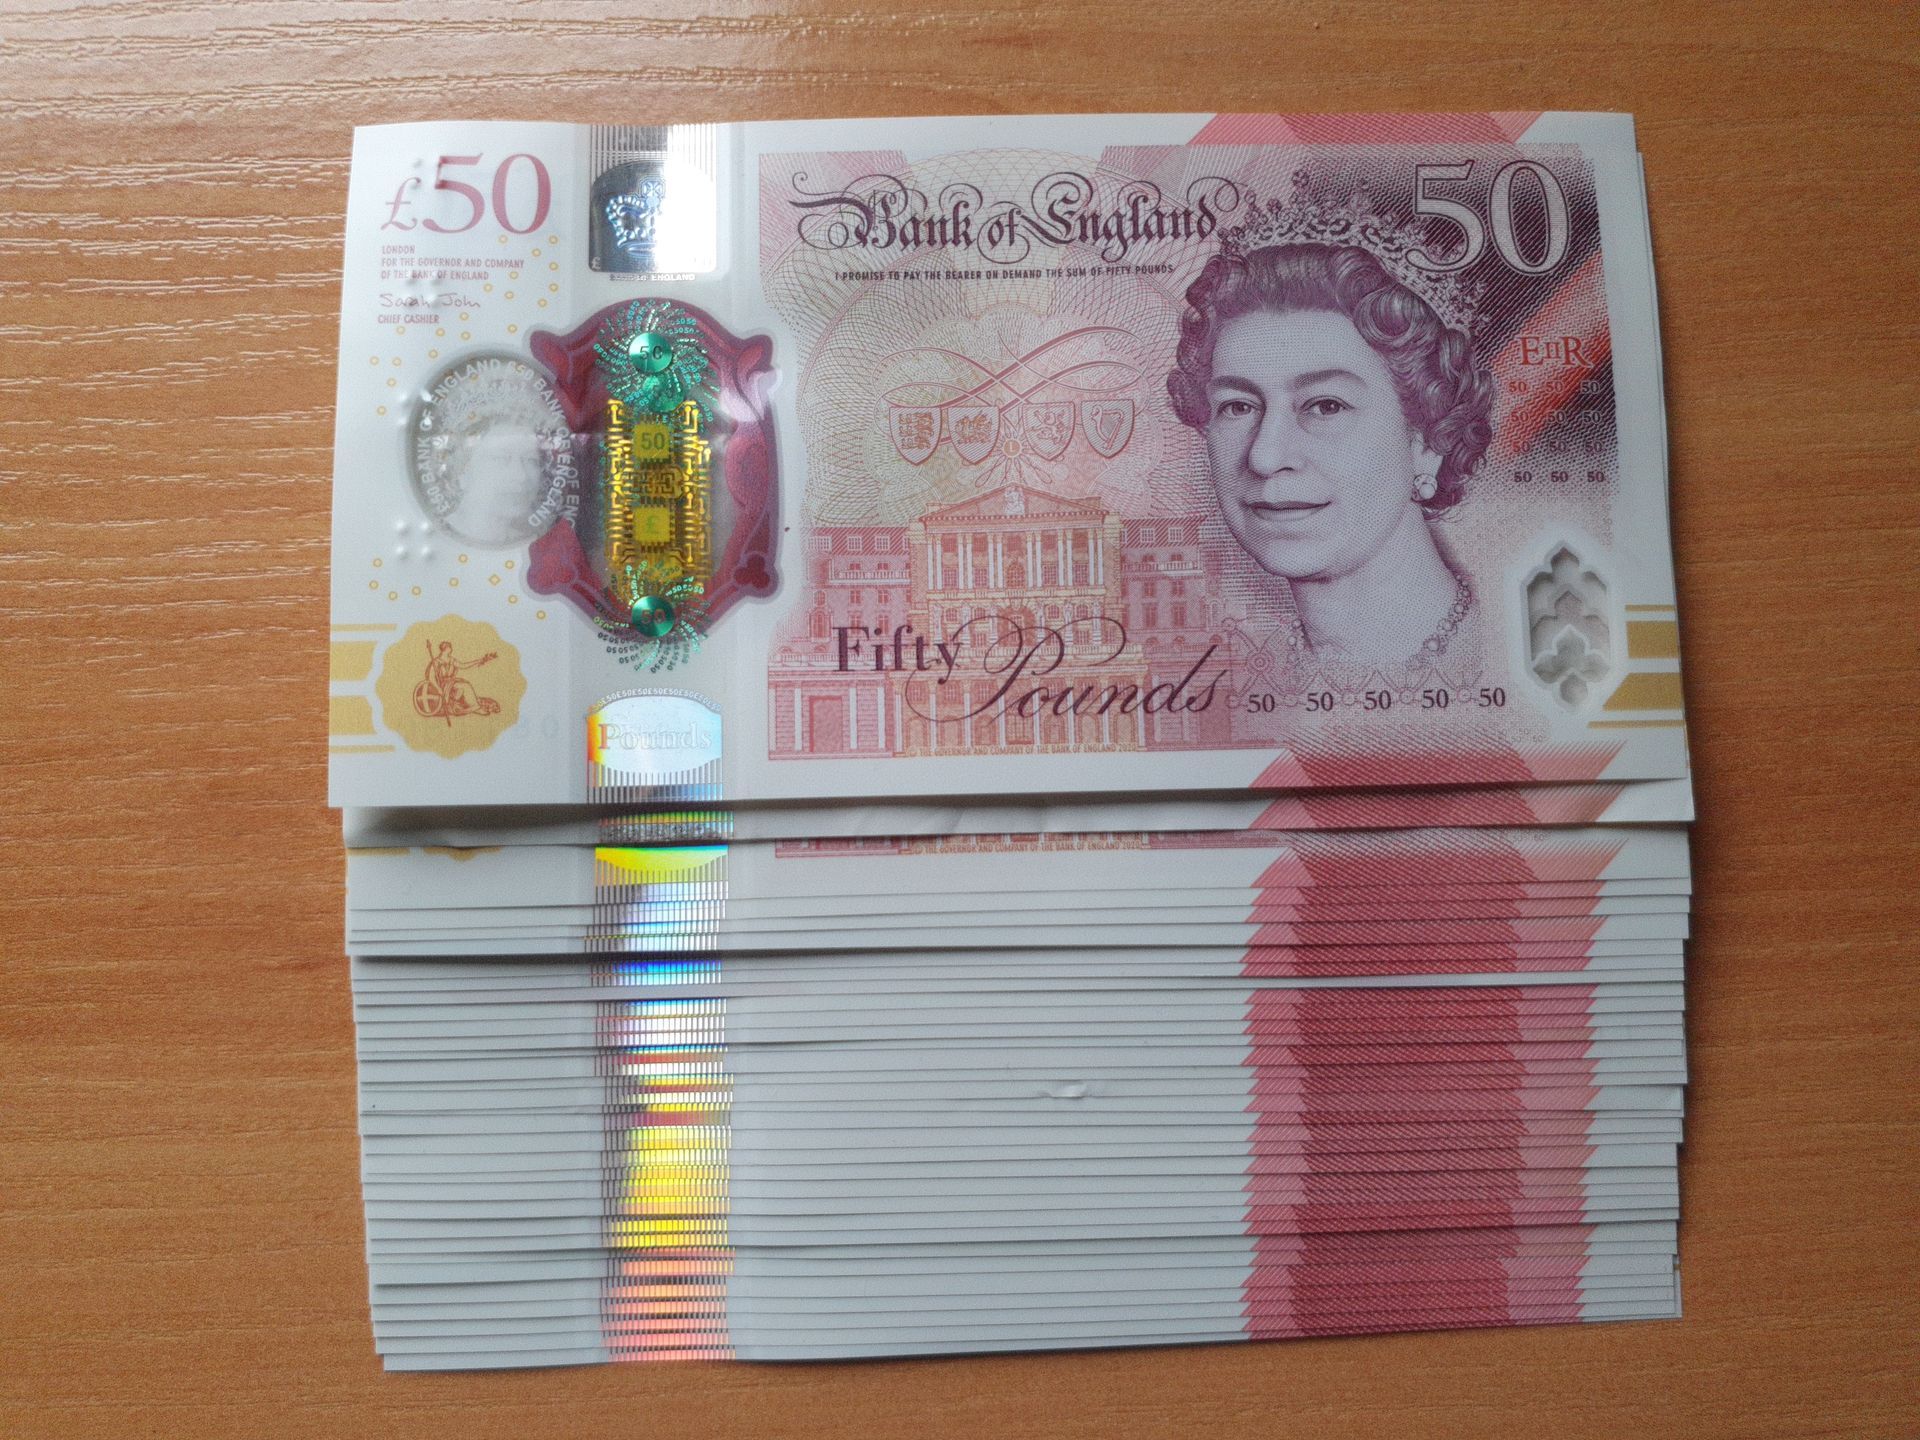 A stack of £50 notes